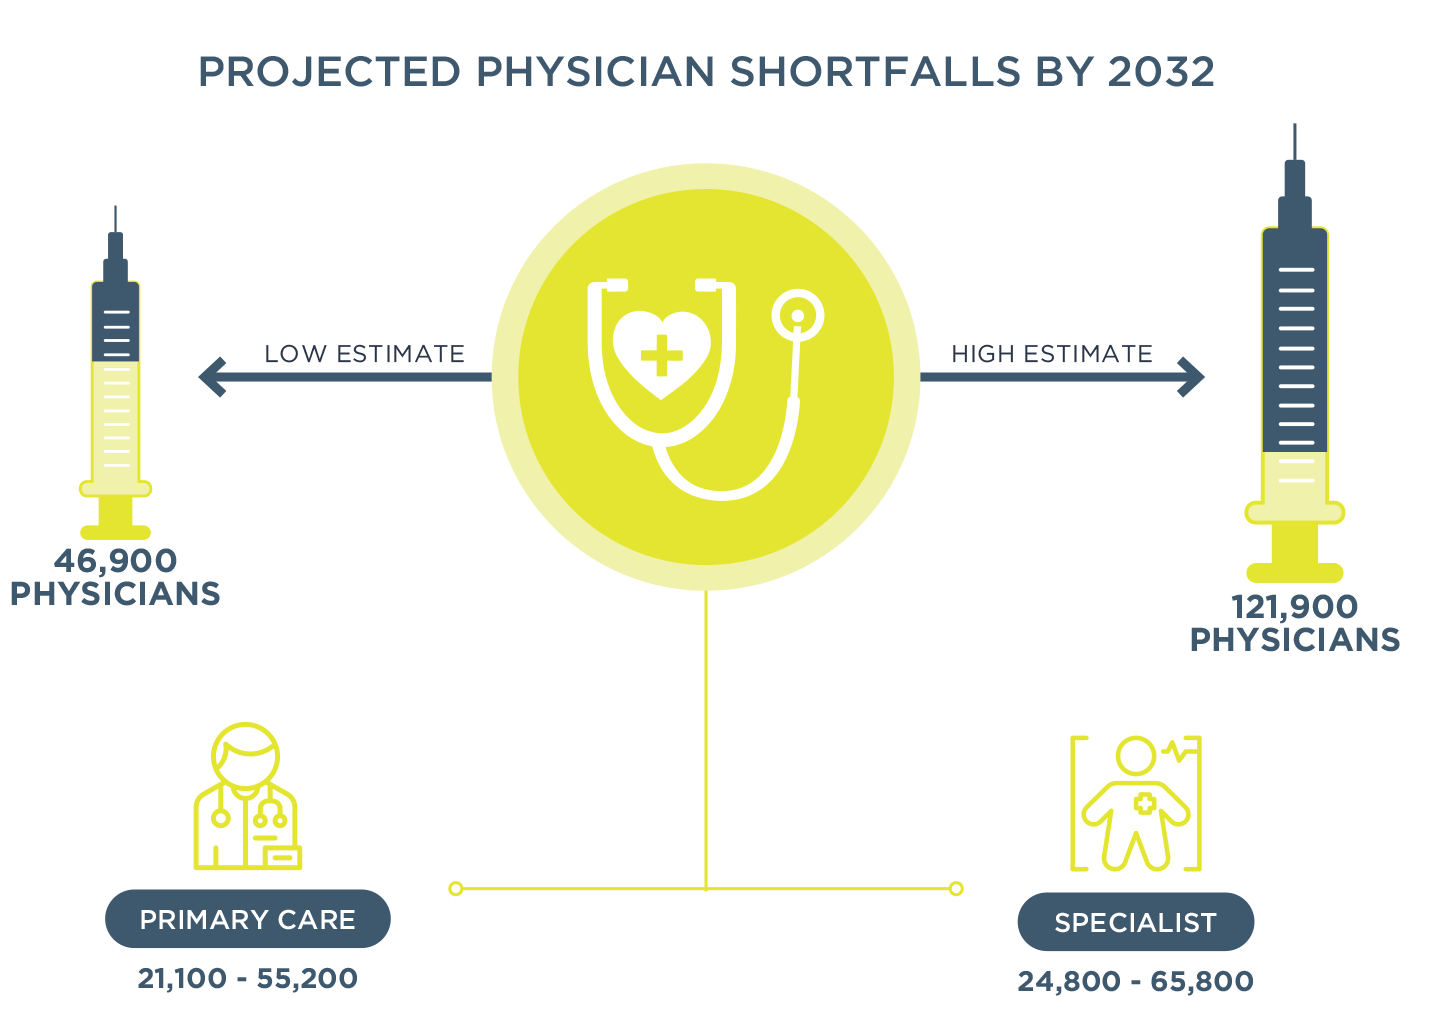 According to new projections from the Association of American Medical Colleges, the shortage of physicians, primary care doctors, and specialists will increase dramatically by 2032. Artificial intelligence (AI) will be an extremely important tool to reduce their workload.